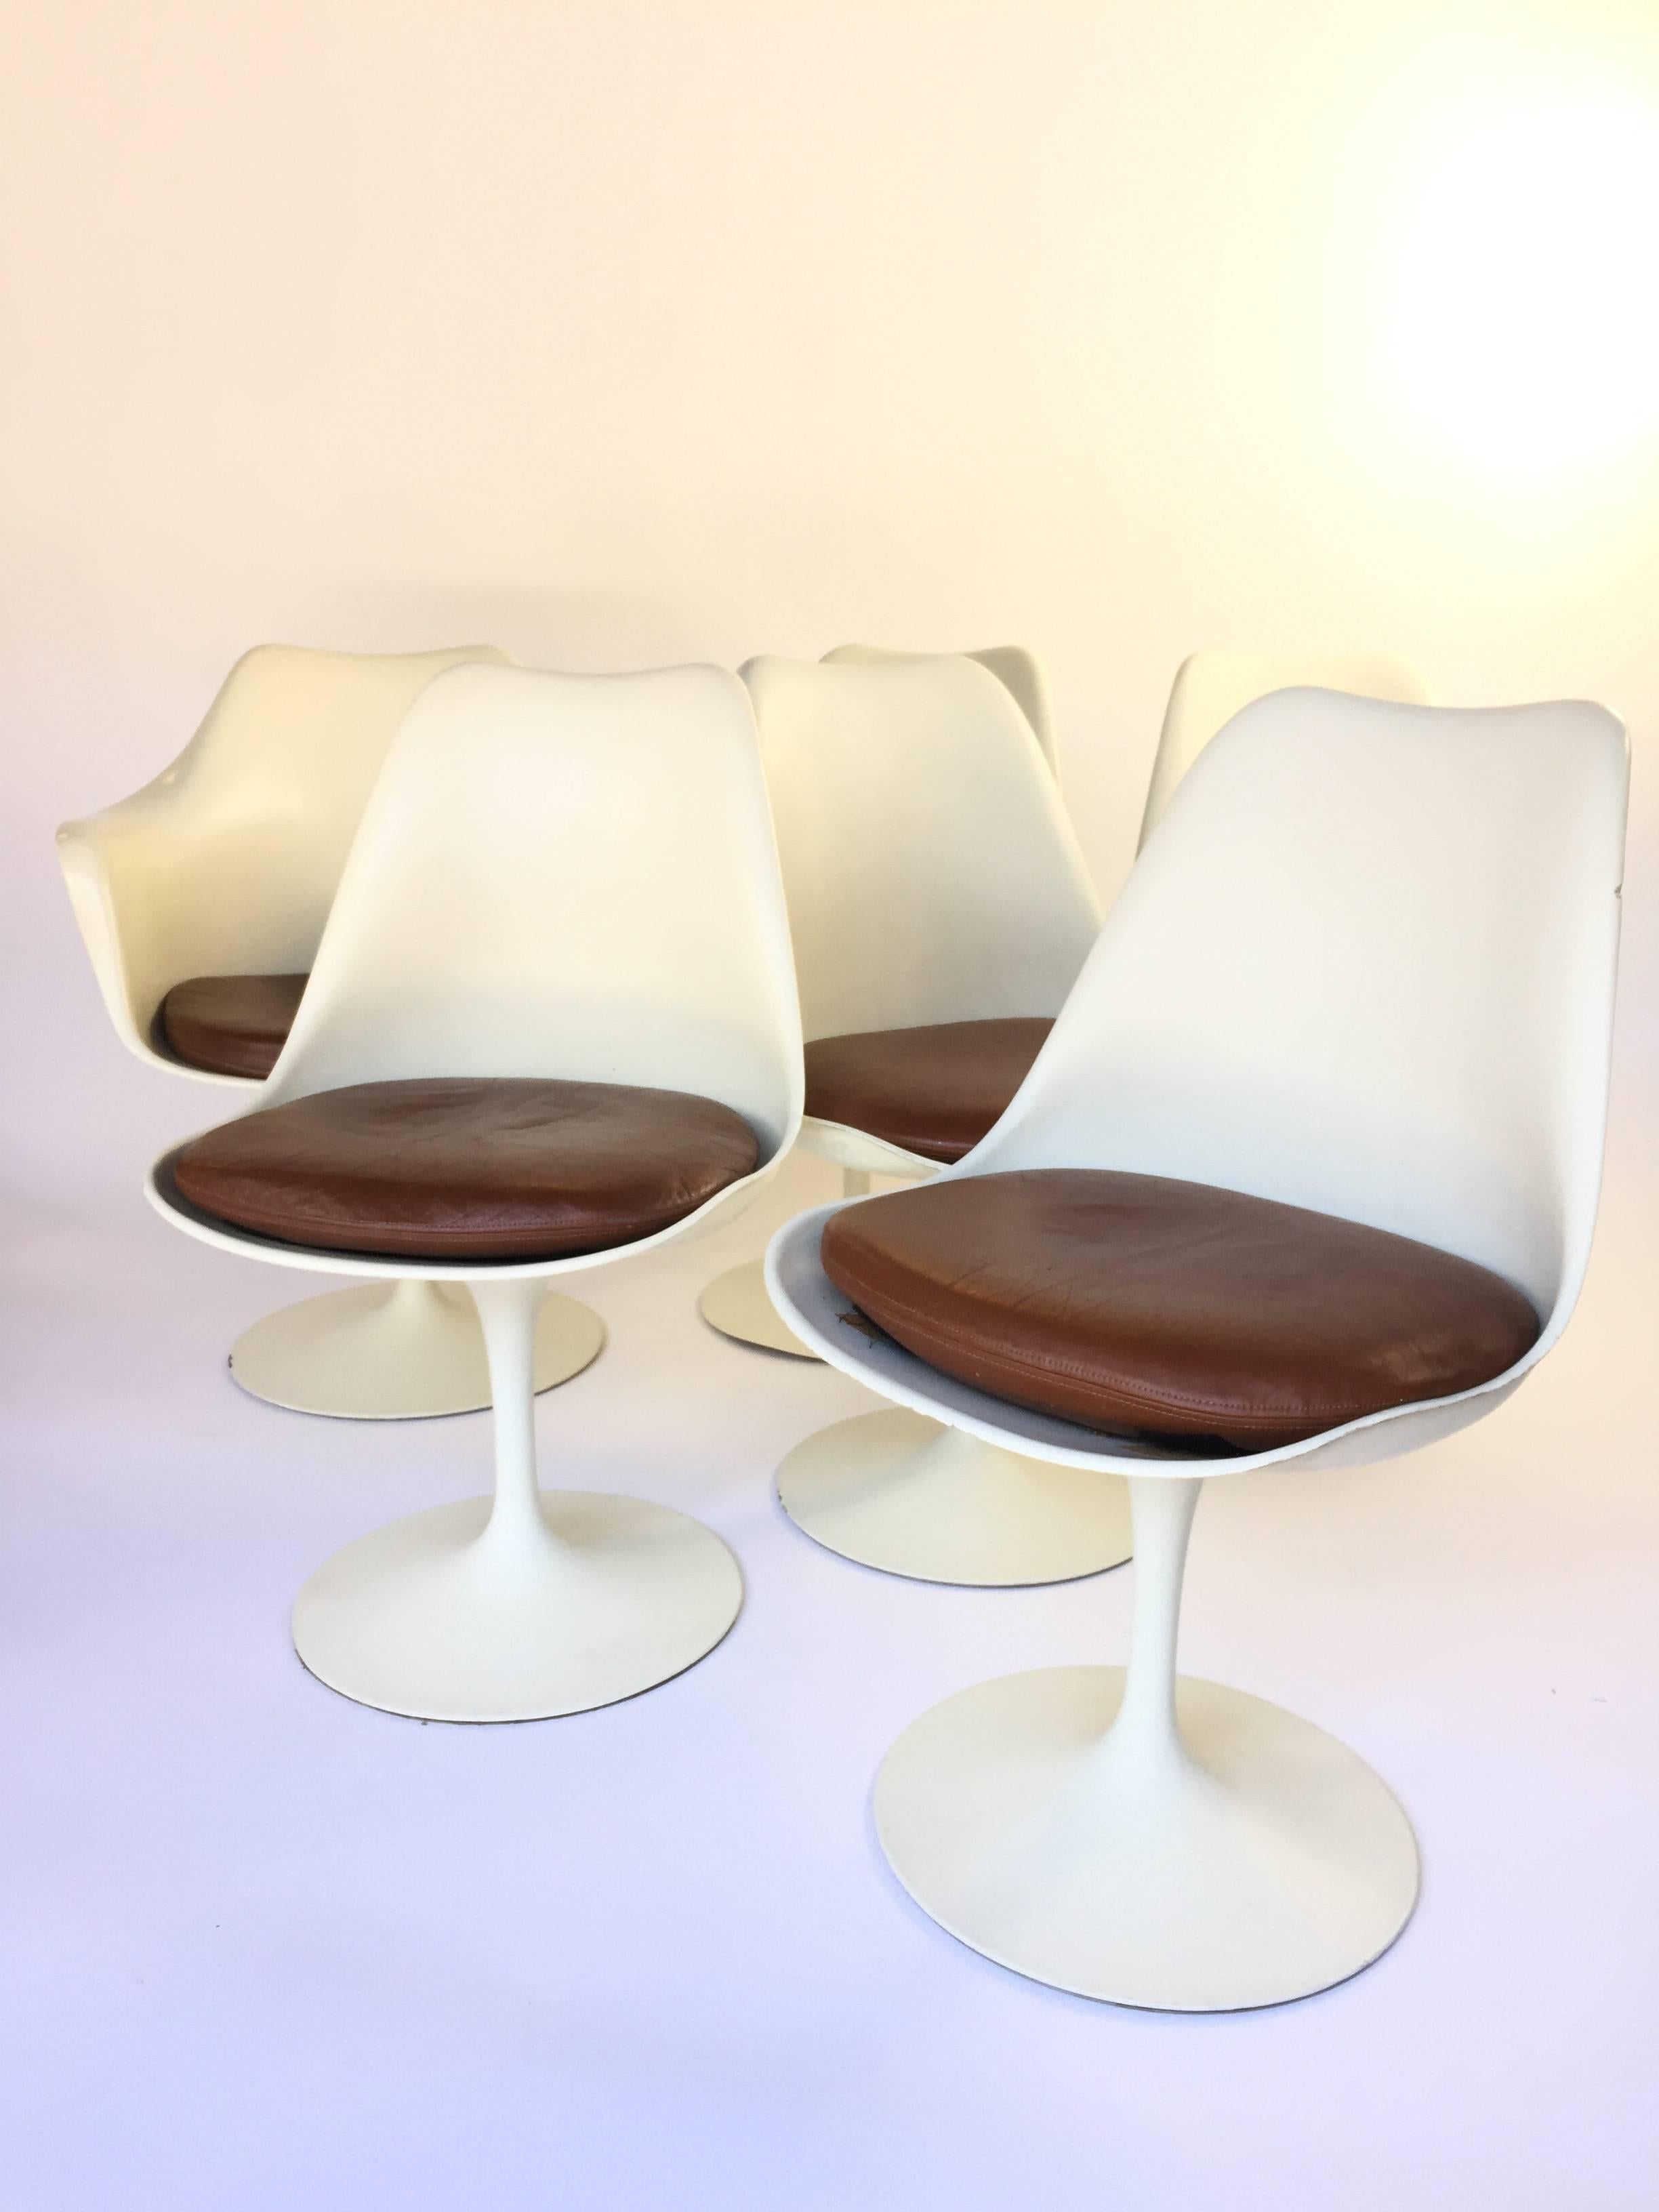 Five side chairs, one armchair. Eero Saarinen for Knoll Tulip chairs with original brown leather seats. Nice patina throughout. Not restored - original dings and dents plus supple worn leather. Very clean but not 